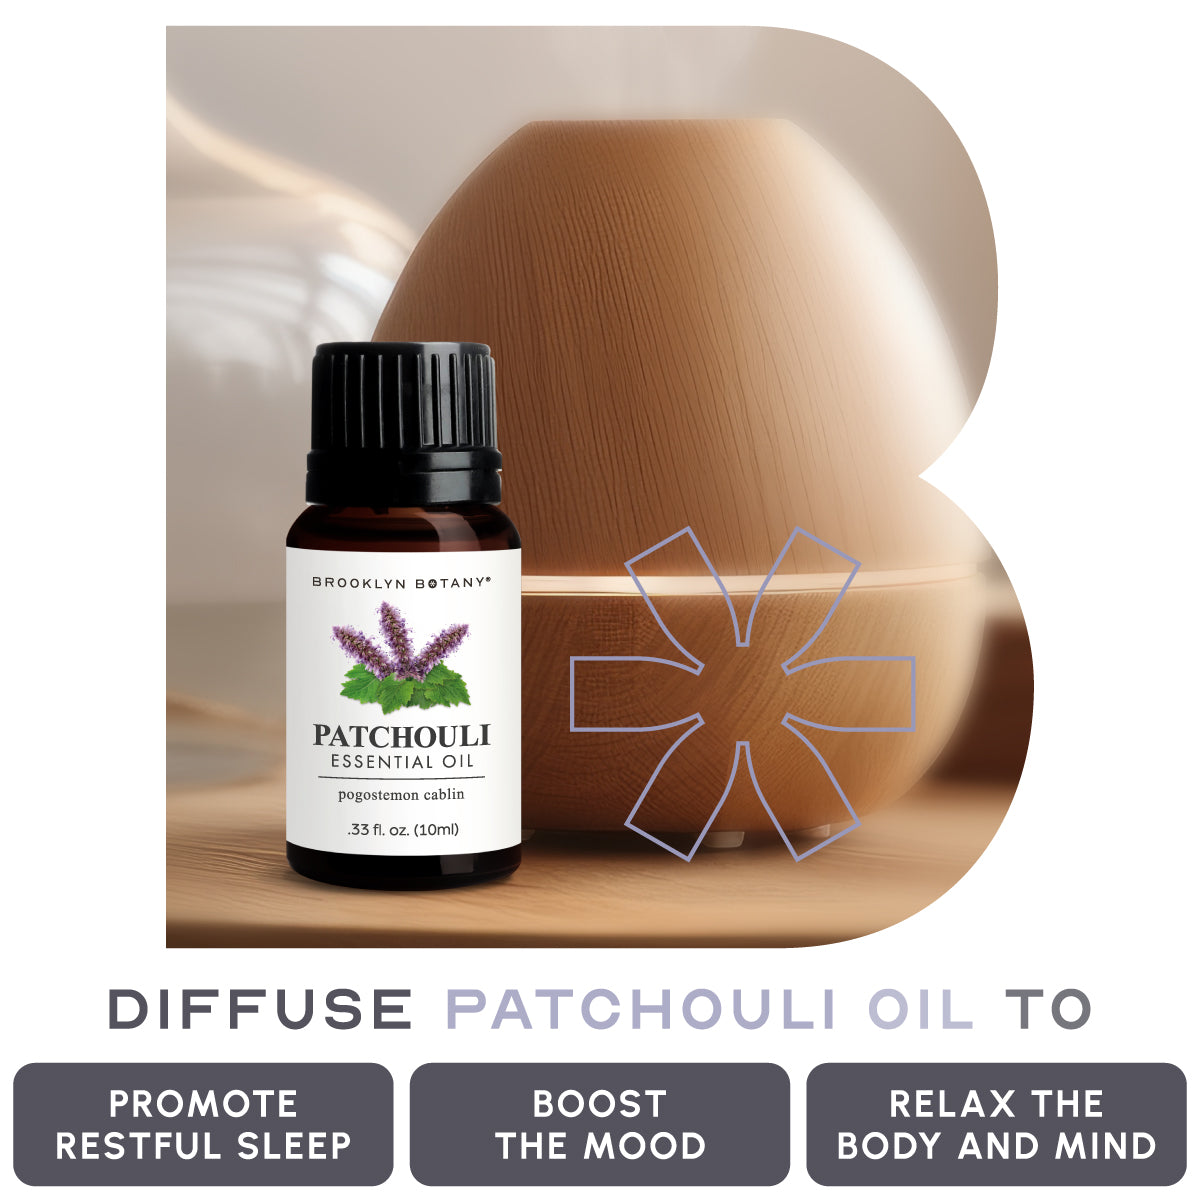 Patchouli Essential Oil Profile  Miracle Botanicals Blog– Miracle  Botanicals Essential Oils